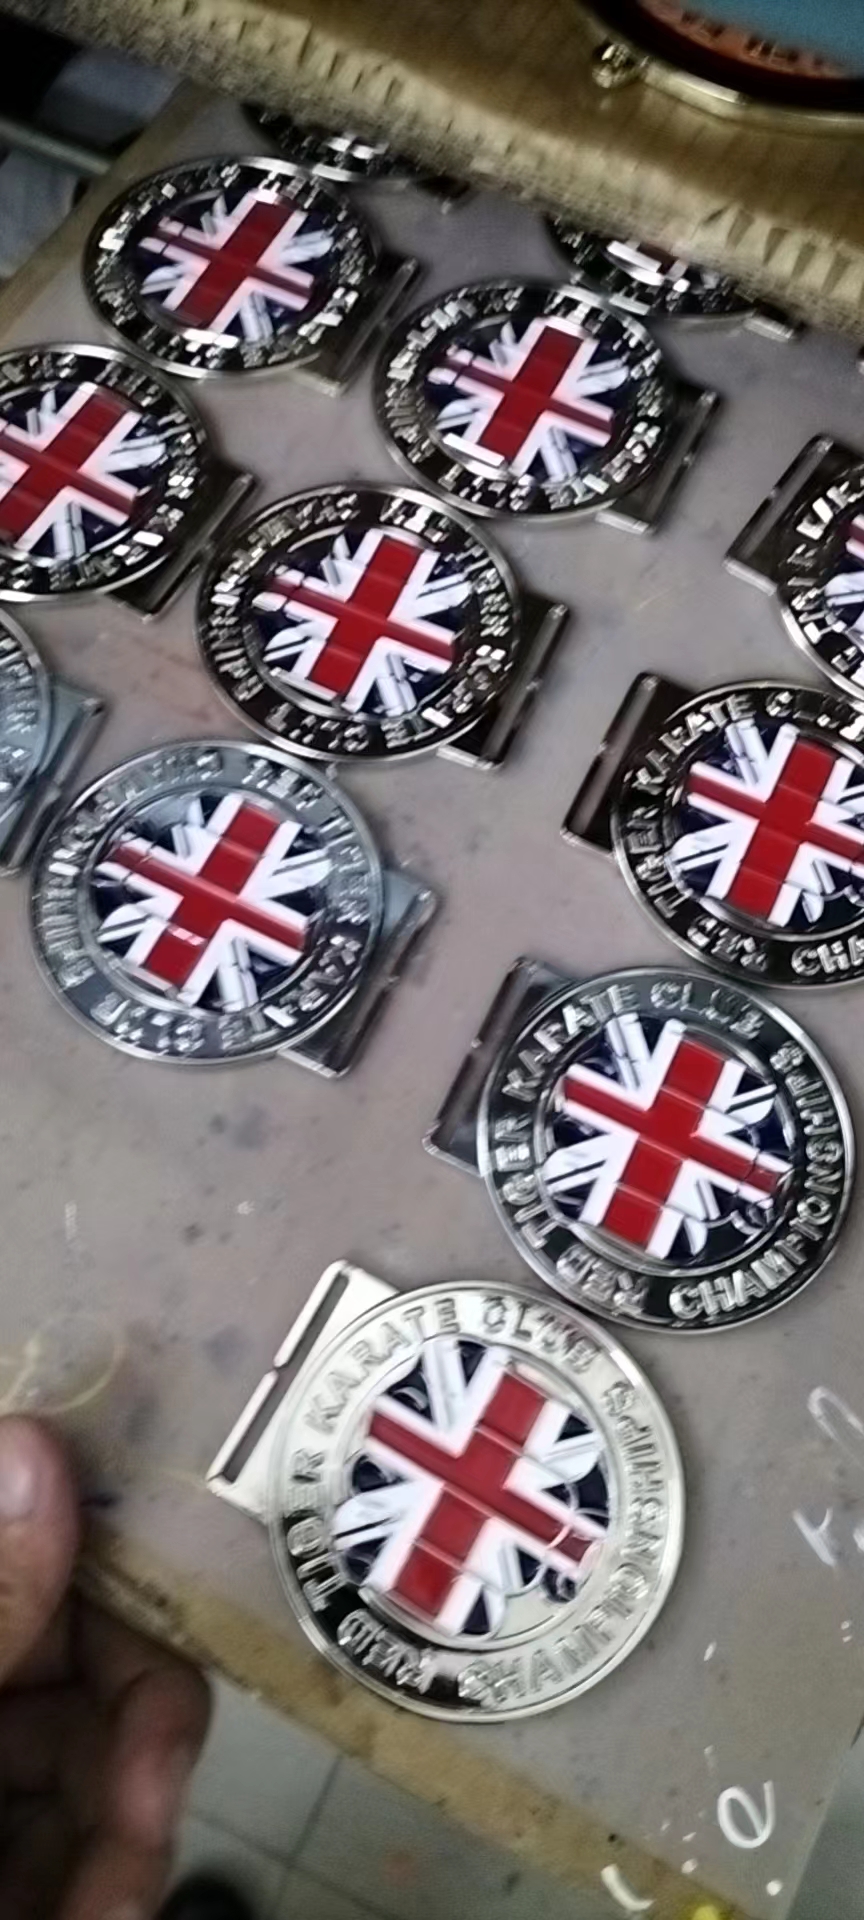 bespoke sports medals